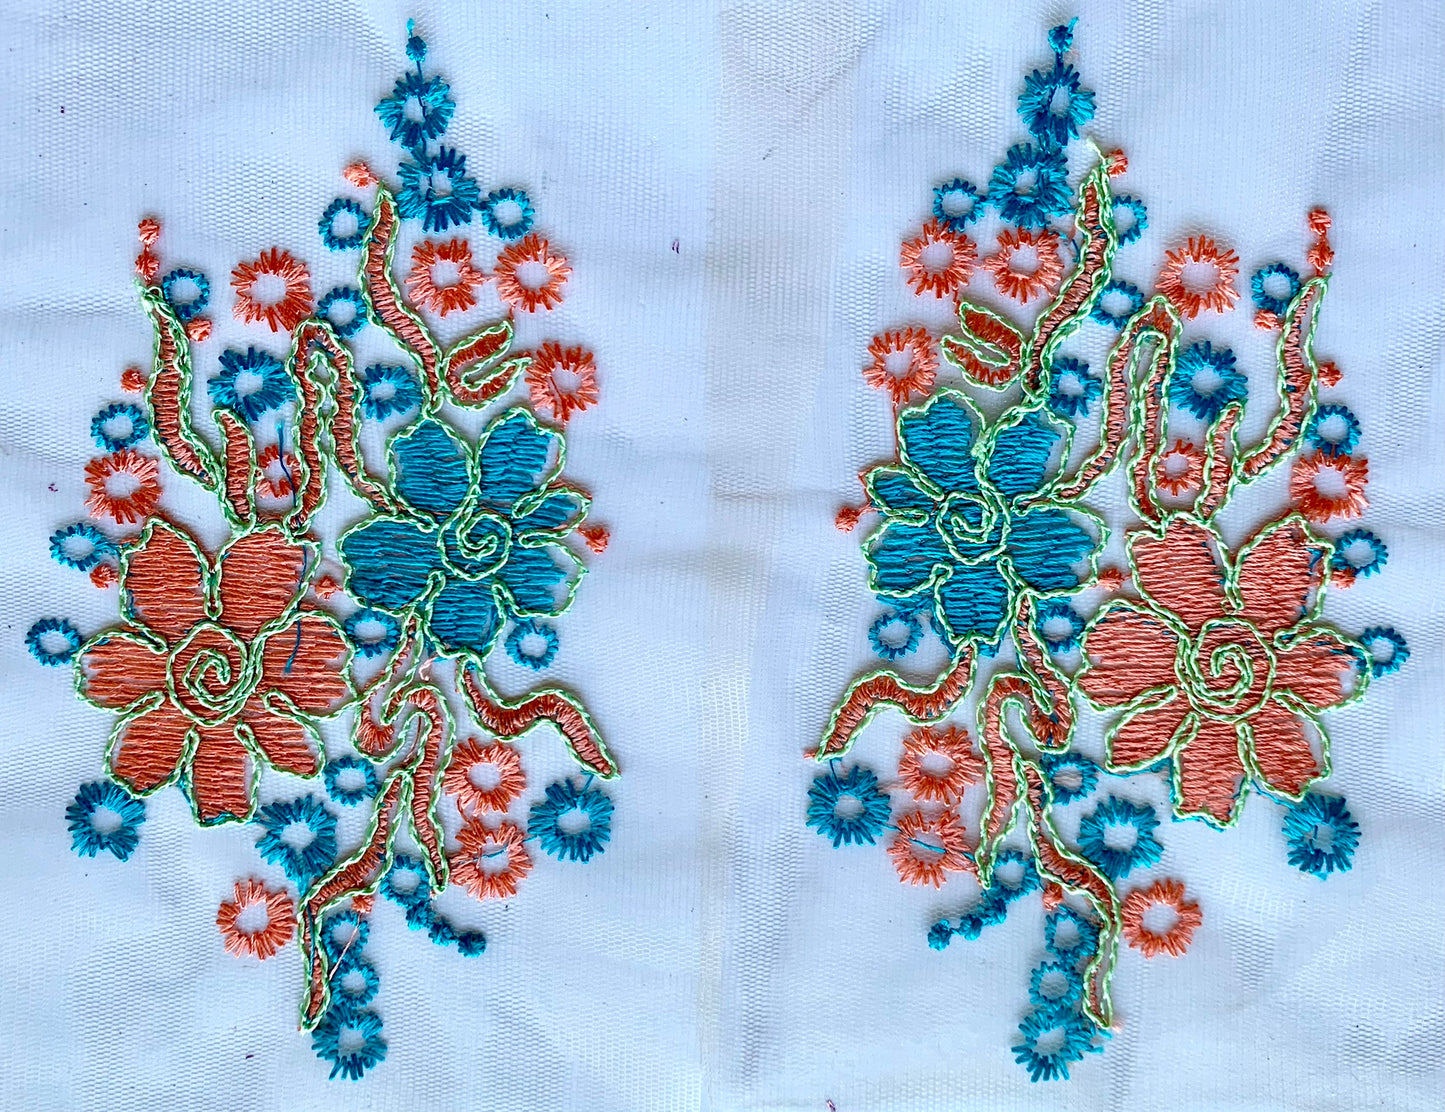 Turquoise and Apricot Lace Border Trim - LBT#41